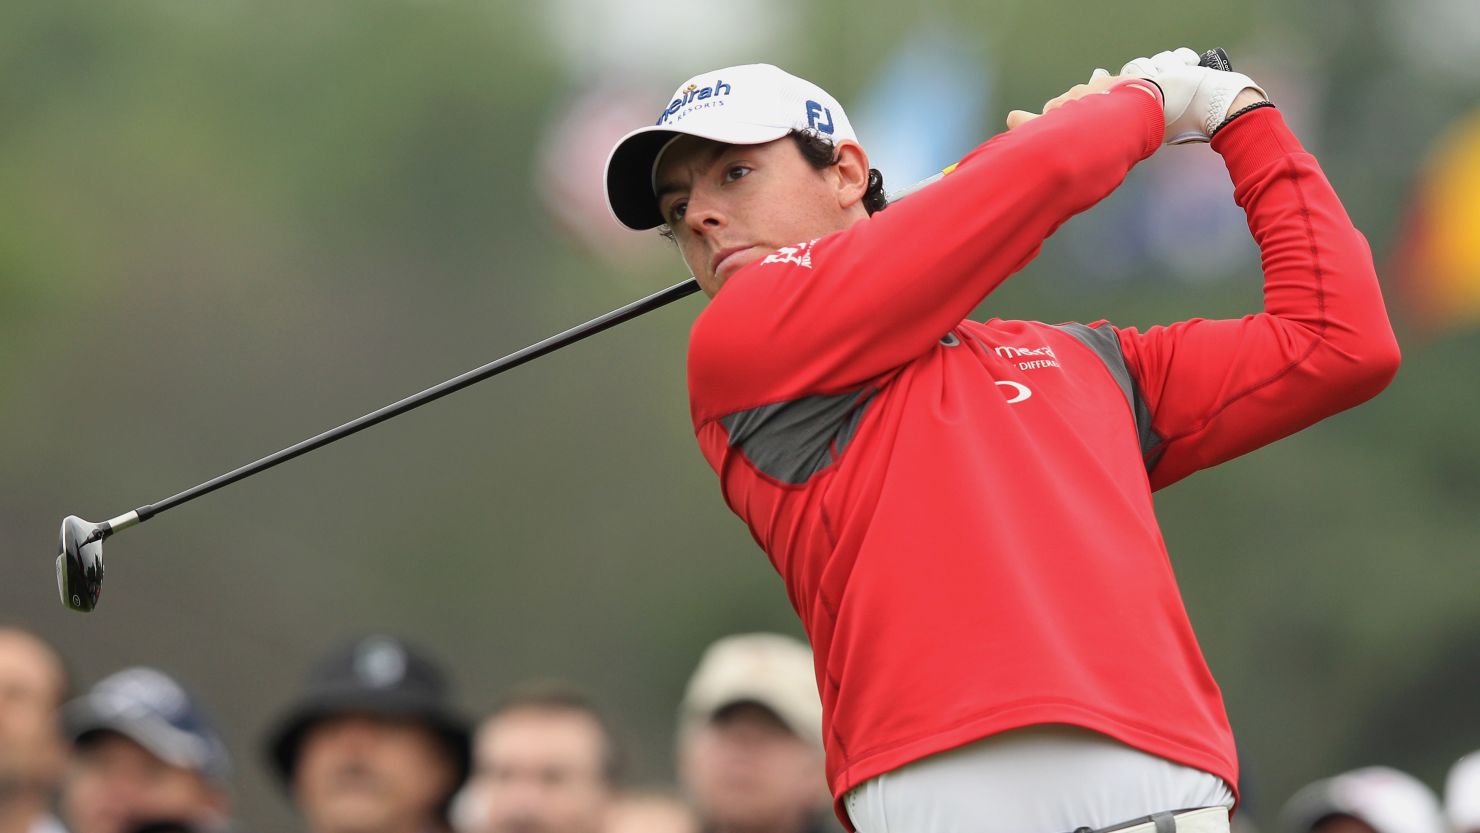 Rory McIlroy cardied three bogeys and two double-bogeys in Friday's second round at Muirfield Village in Dublin, Ohio.